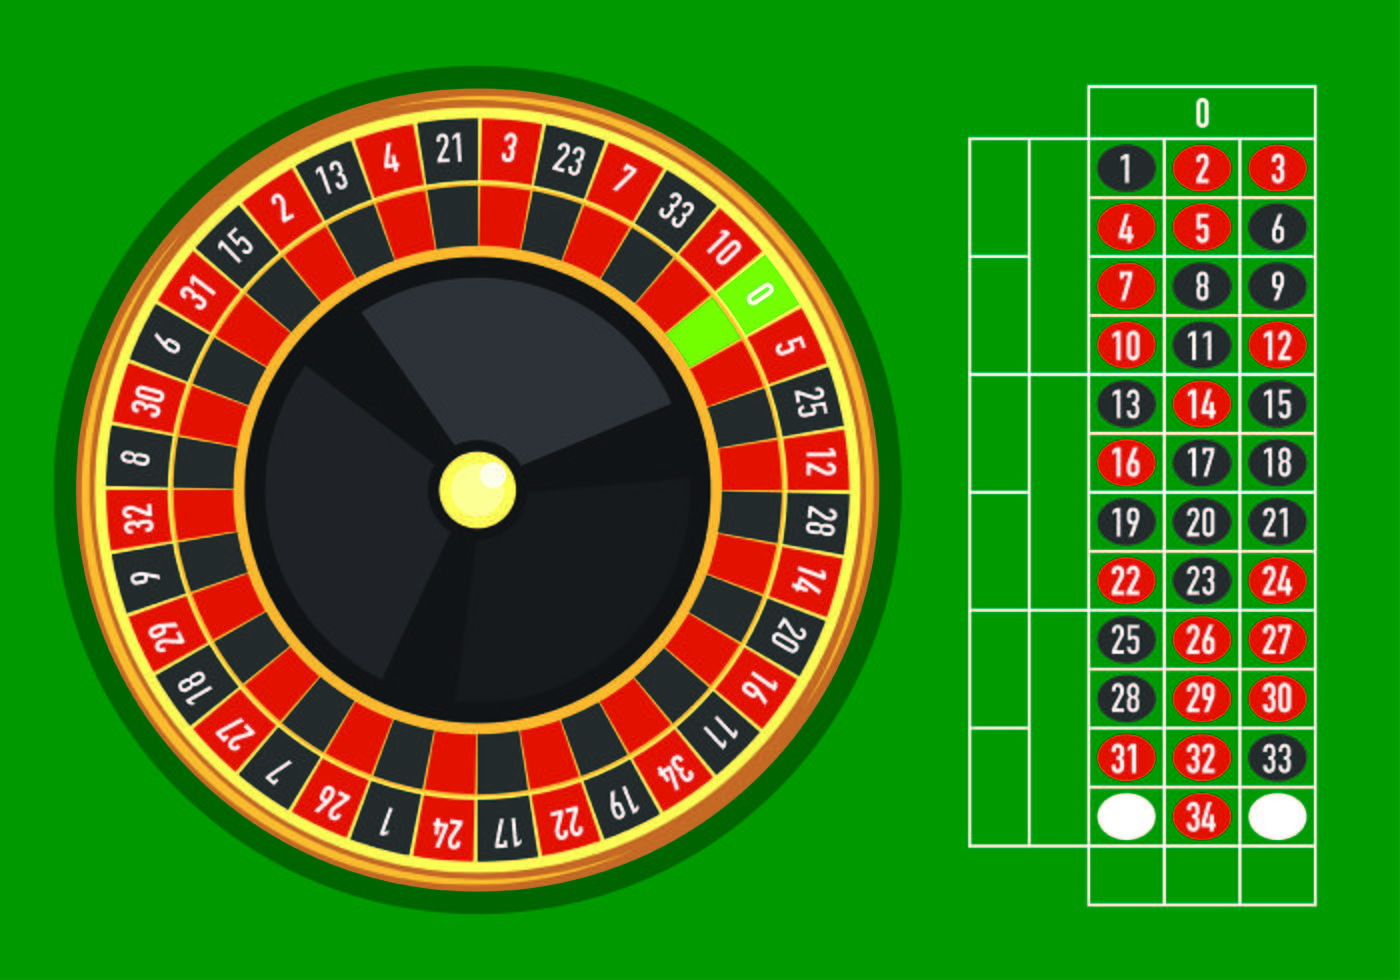 Play Online Roulette Real Money Online Roulette Games - Free Roulette Table